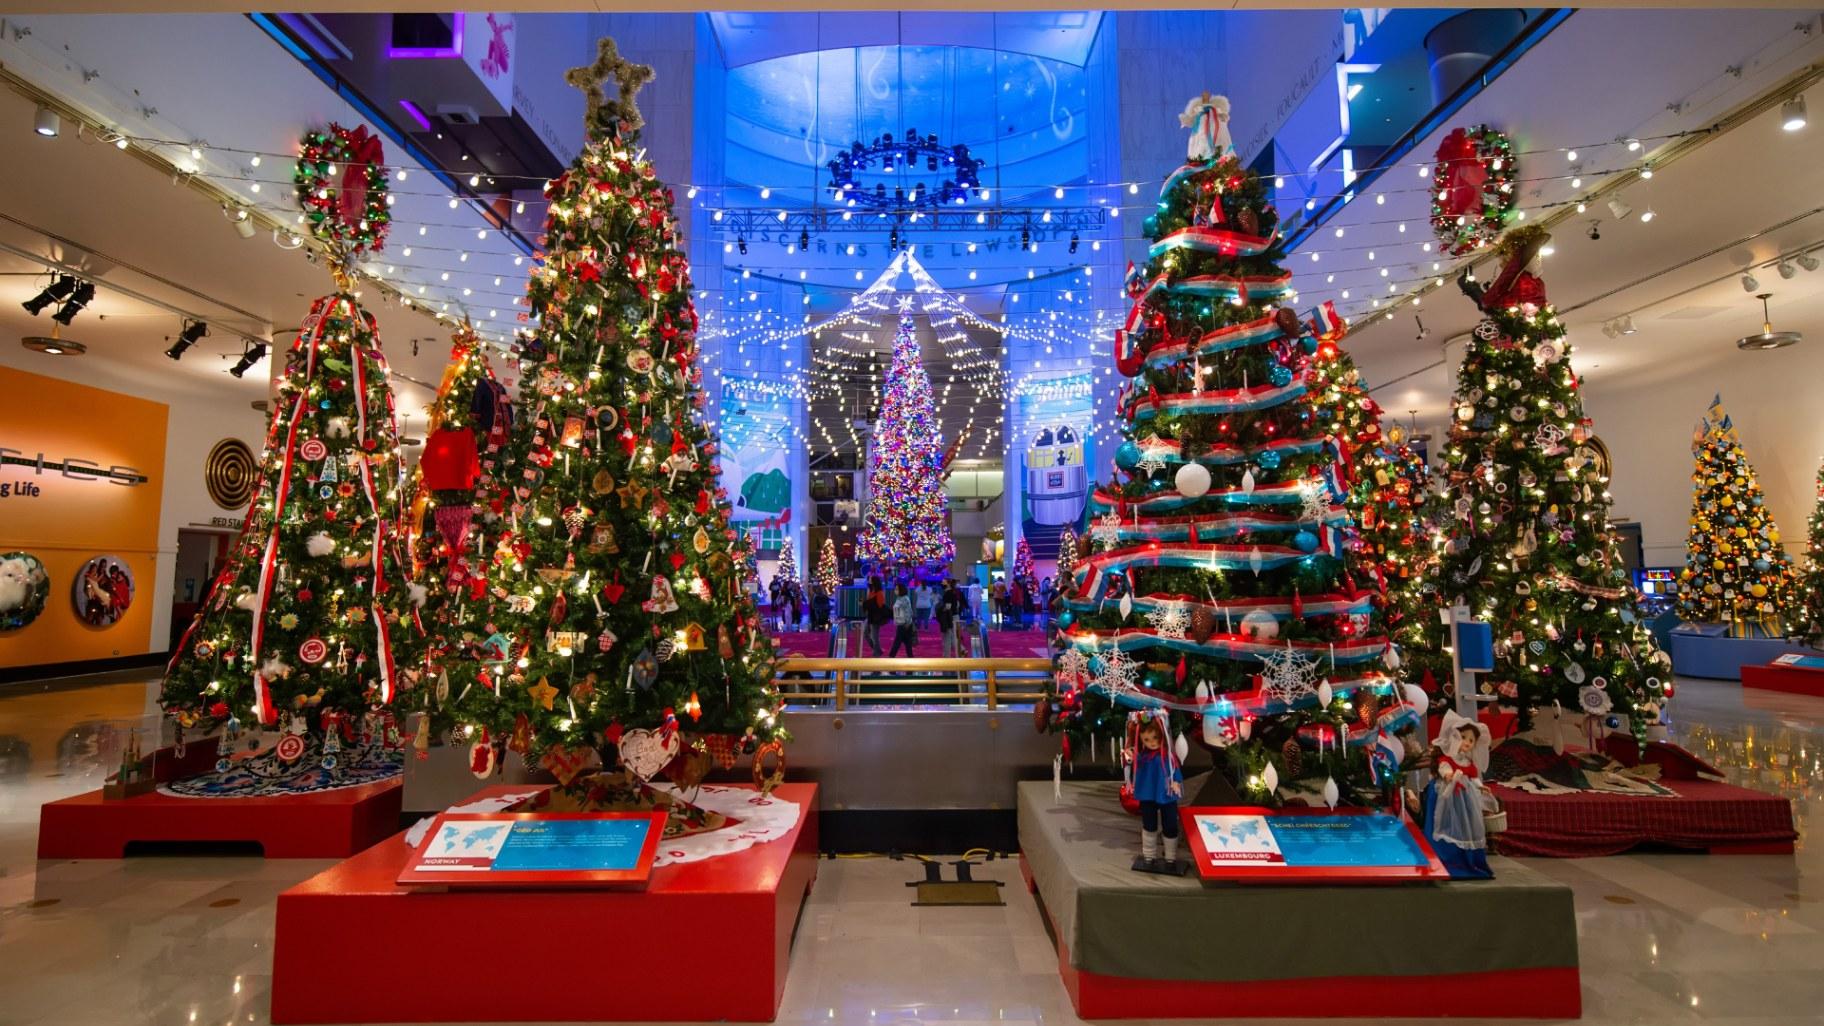 The annual “Christmas Around the World” exhibit at Museum of Science and Industry. (Credit: Heidi Peters / Museum of Science and Industry, Chicago)